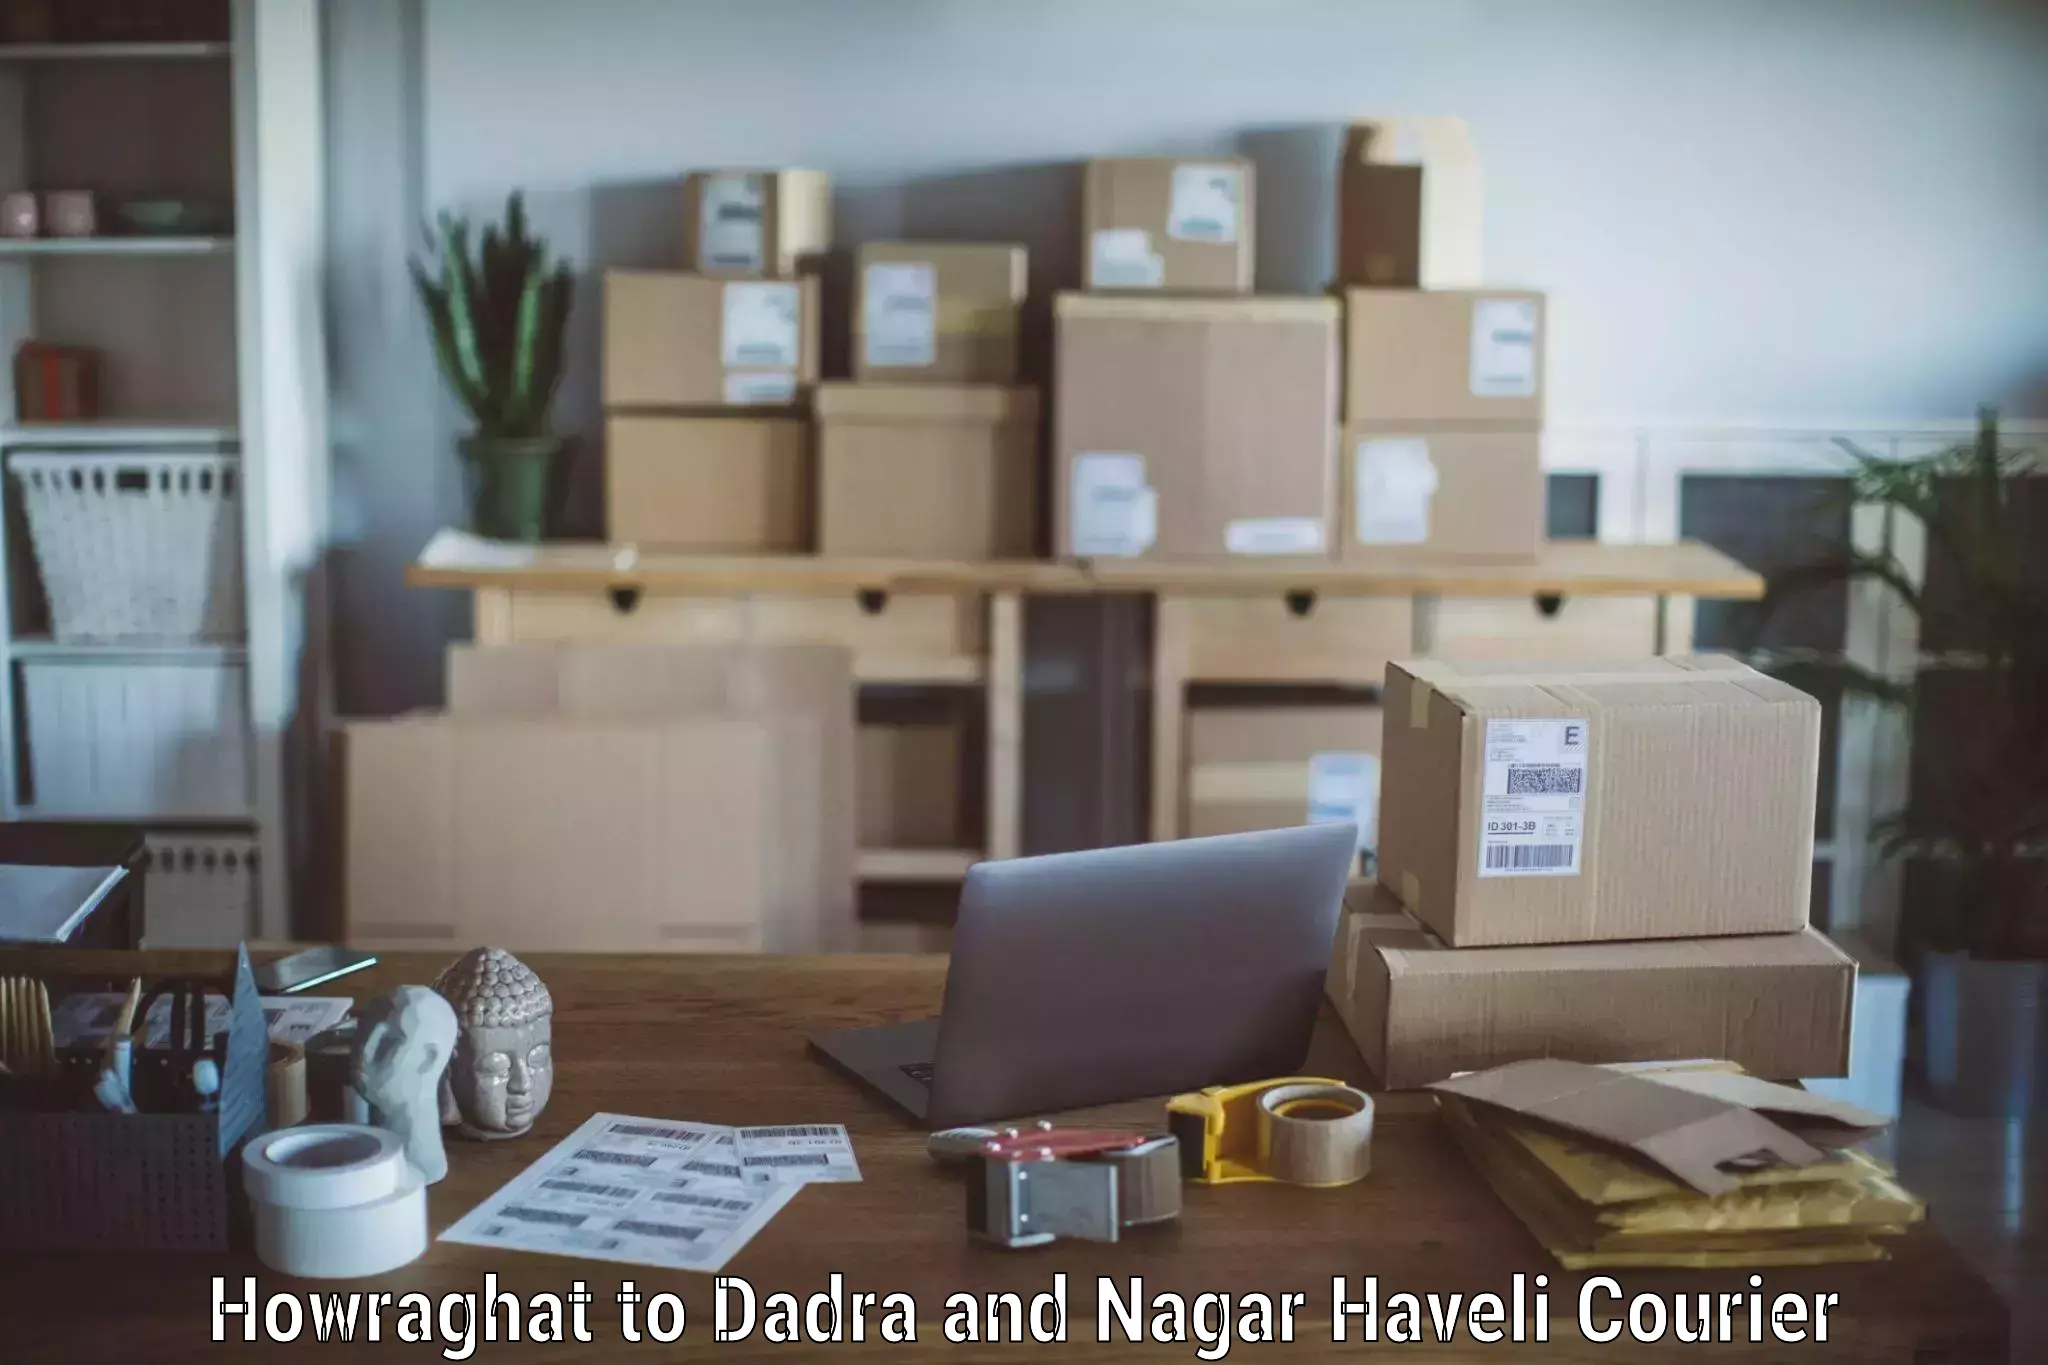 Home relocation solutions Howraghat to Dadra and Nagar Haveli